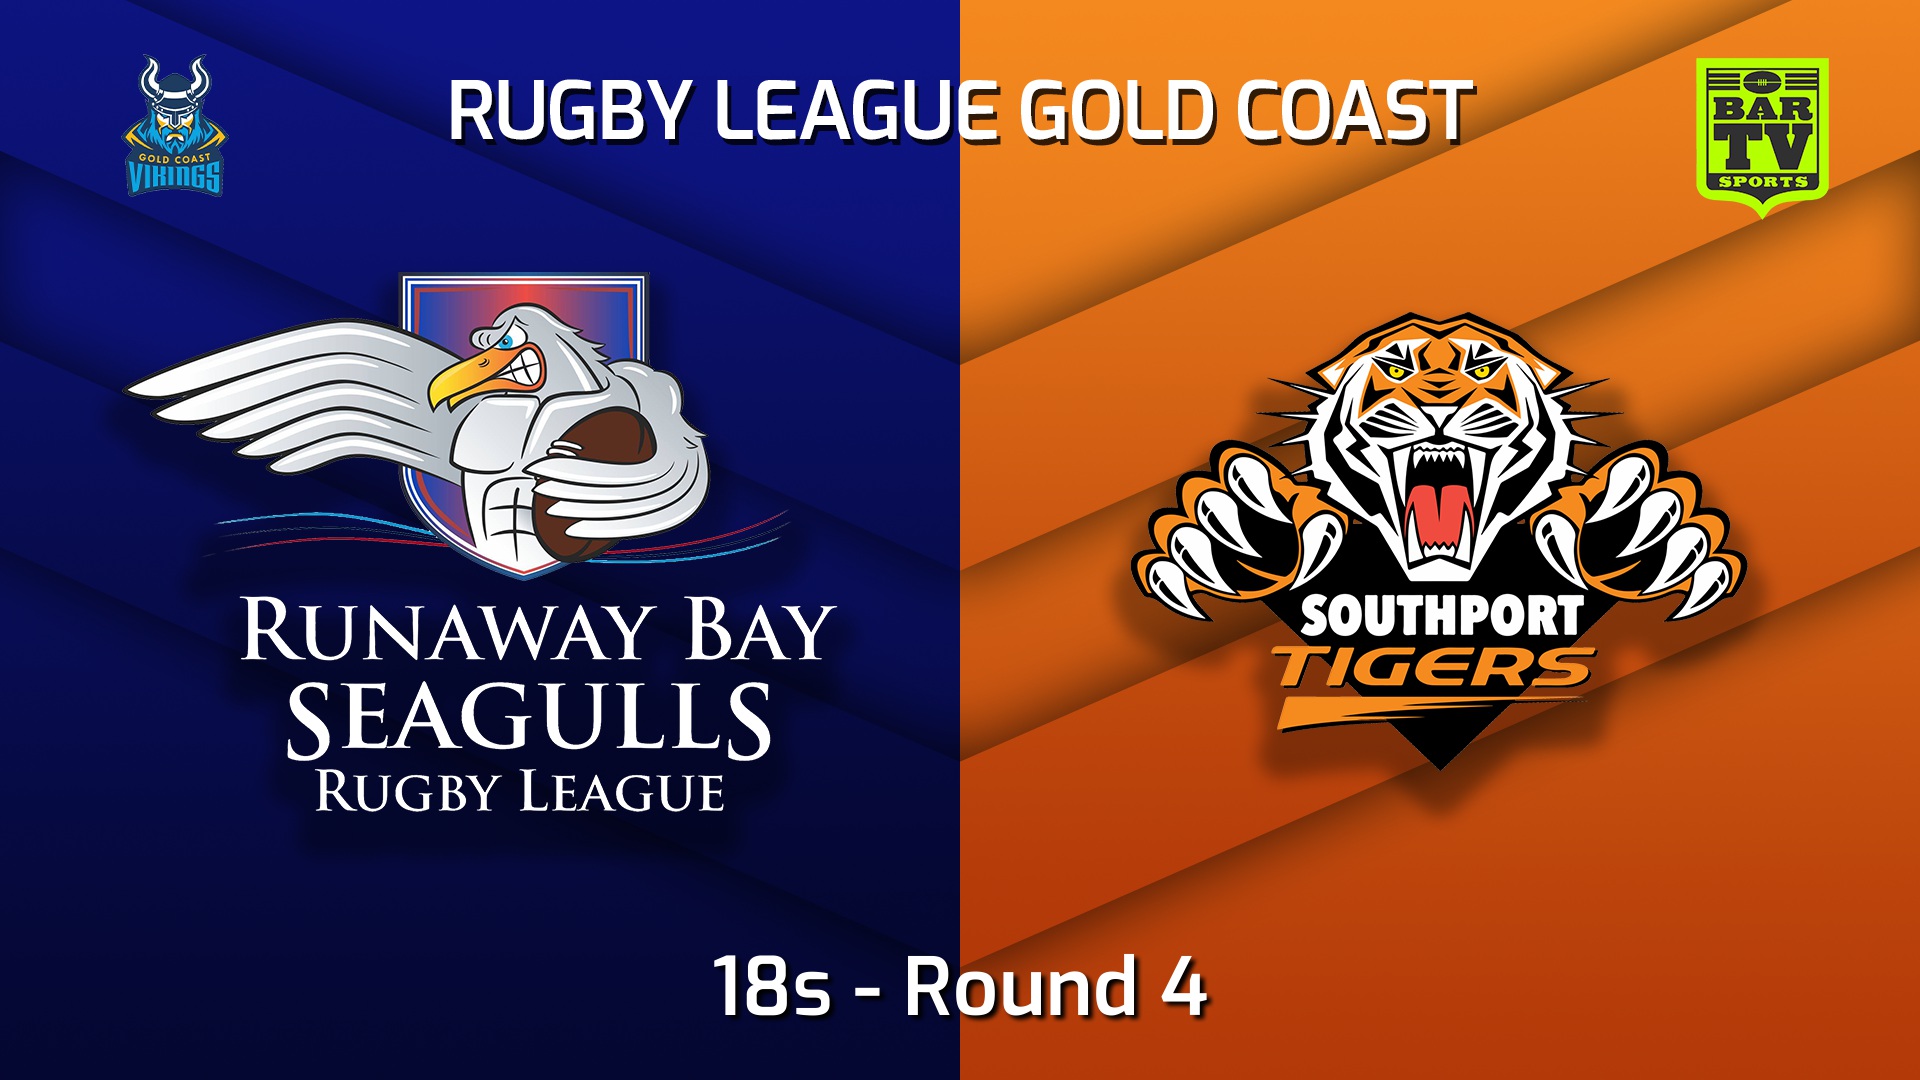 Gold Coast Round 4 - 18s - Runaway Bay Seagulls v Southport Tigers live ...